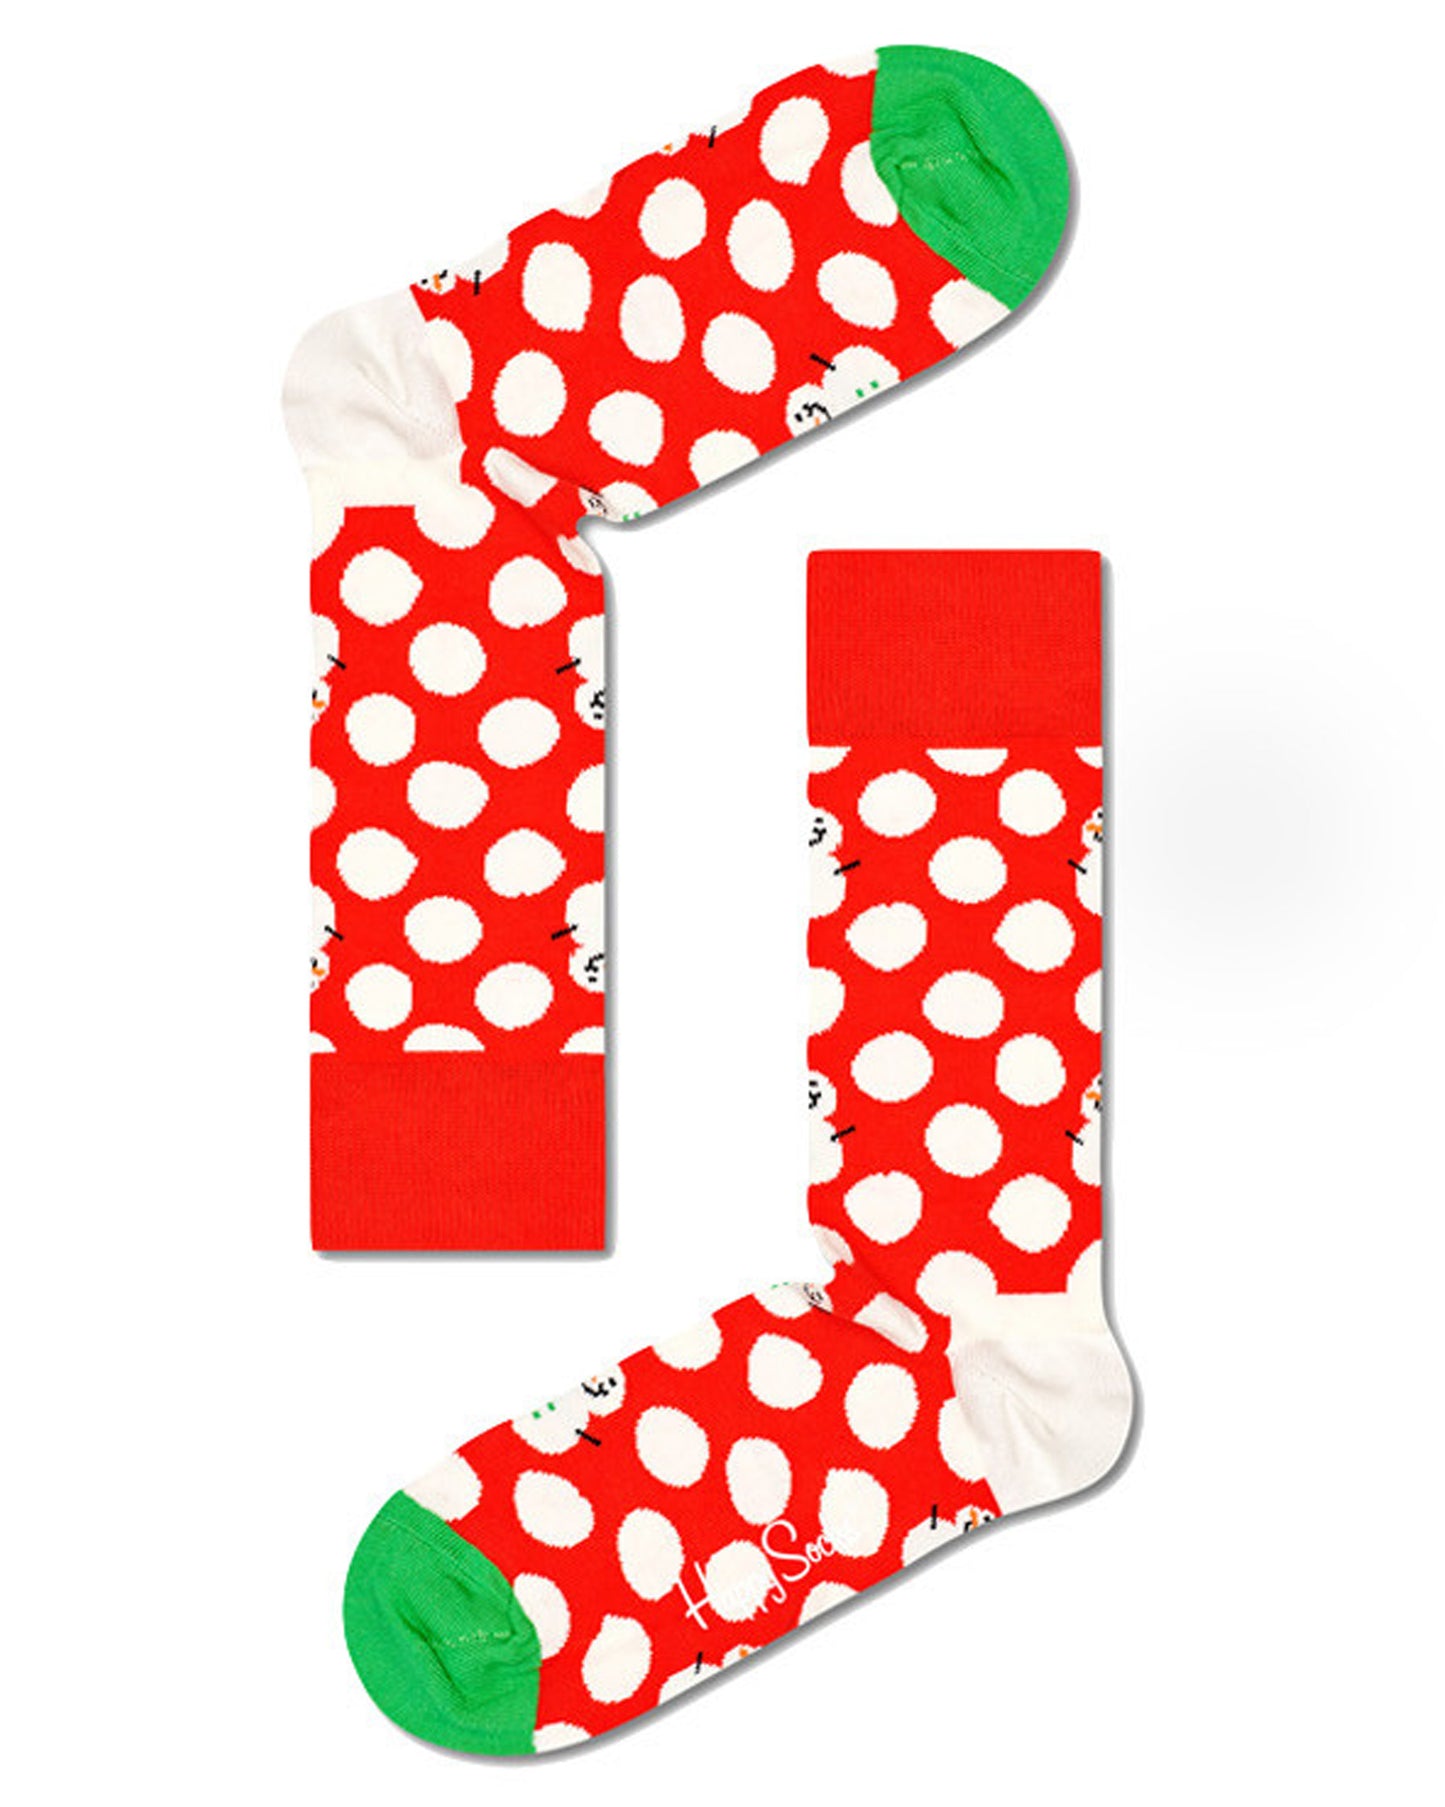 Happy Socks XDBS02-6500 Big Dot Snowman Gift Box - Christmas Cracker gift box with two pairs of socks. One pair is red with white snowman and polka dots pattern.